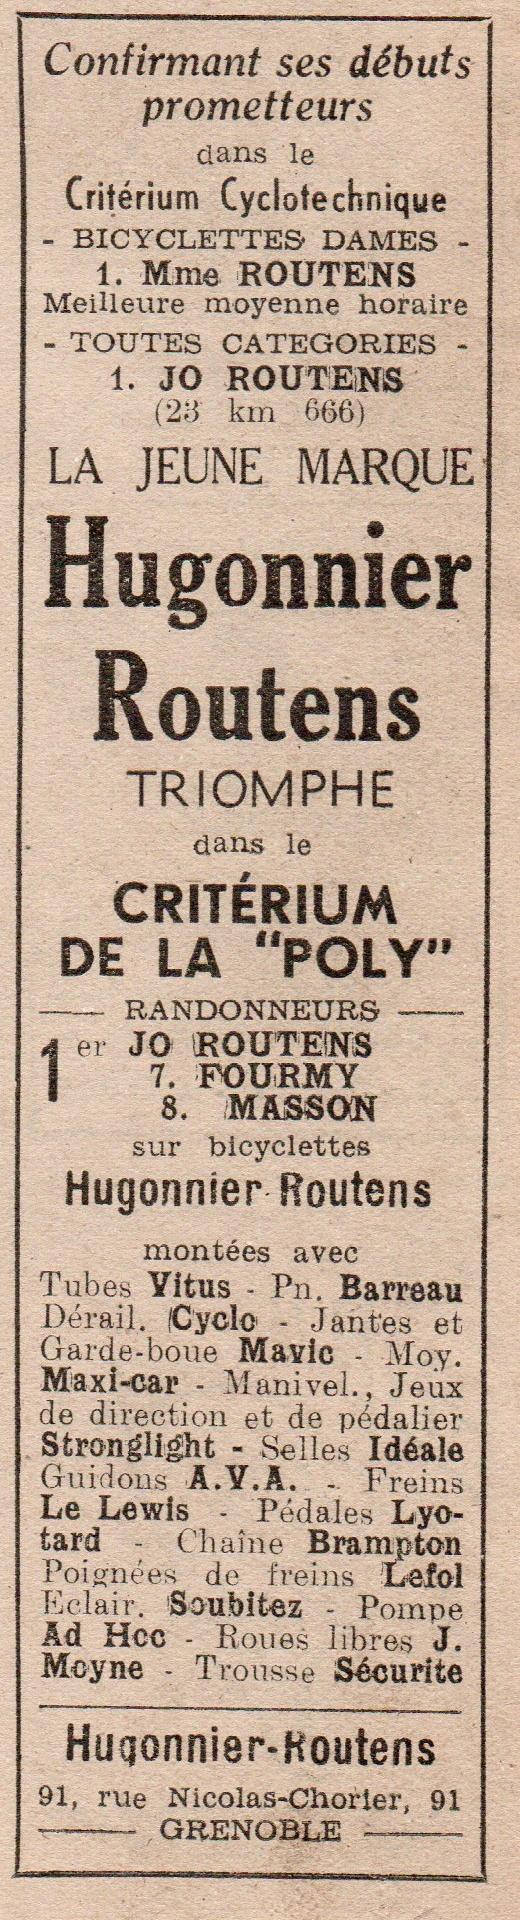 Le cycle n 13 avril 1947 jo routens 04 01